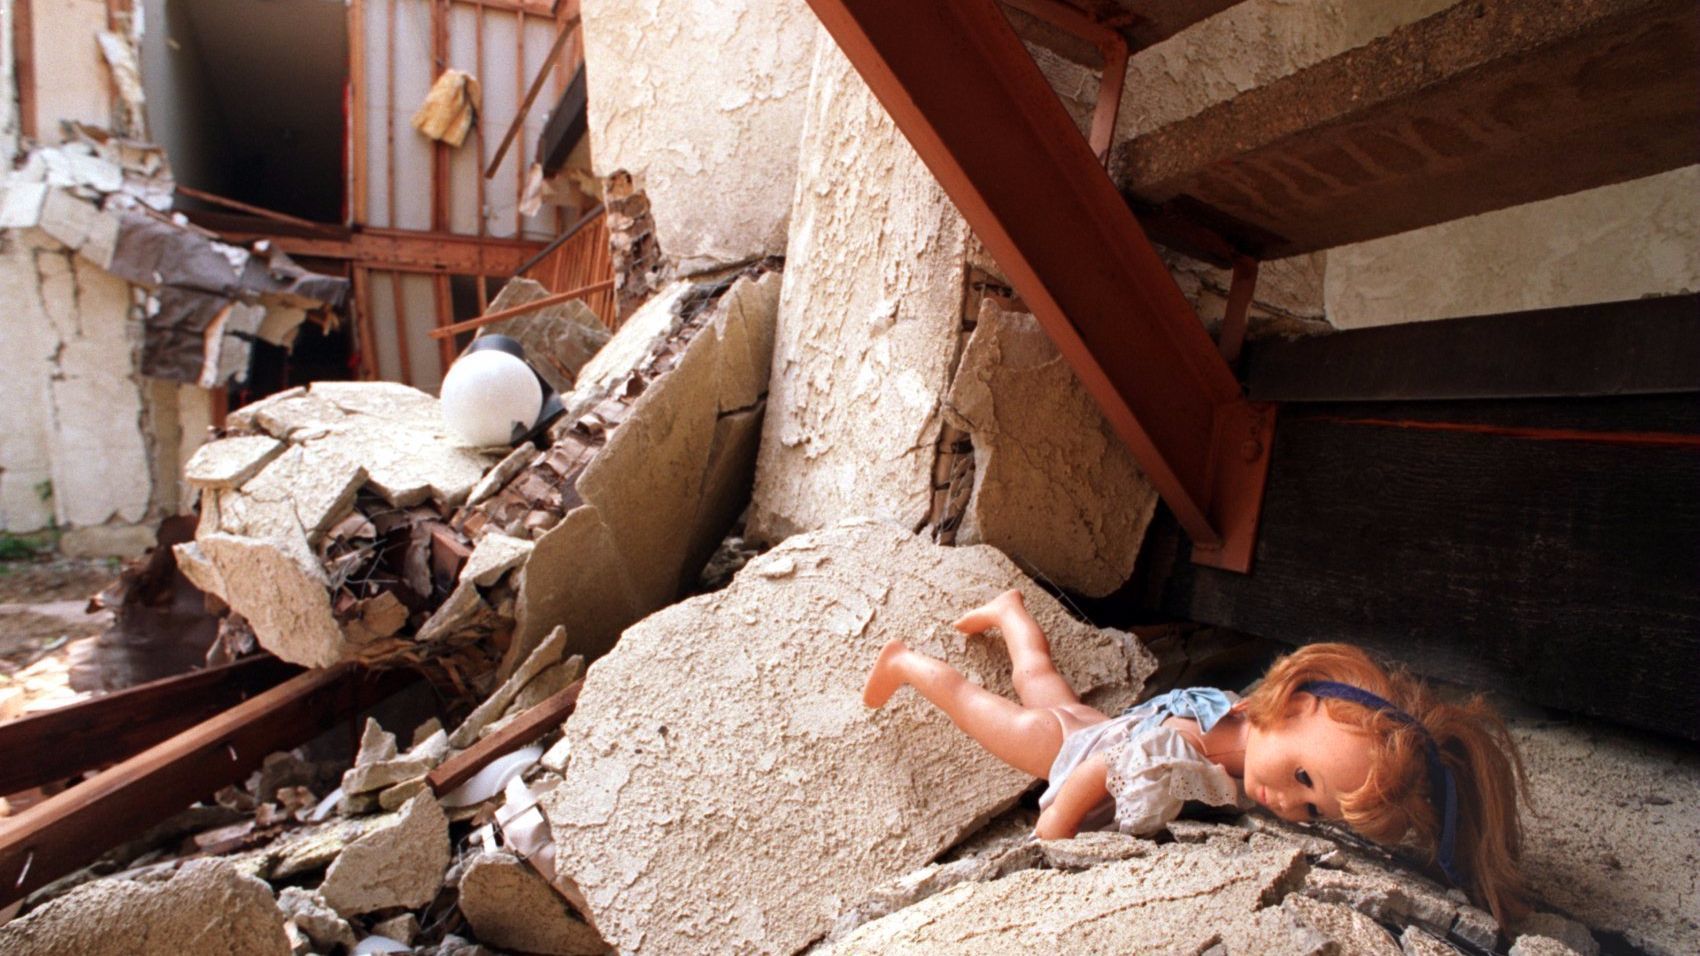 A doll lies in the rubble of the Northridge Meadows apartment, where 16 bodies were found after 1994 Northridge earthquake.